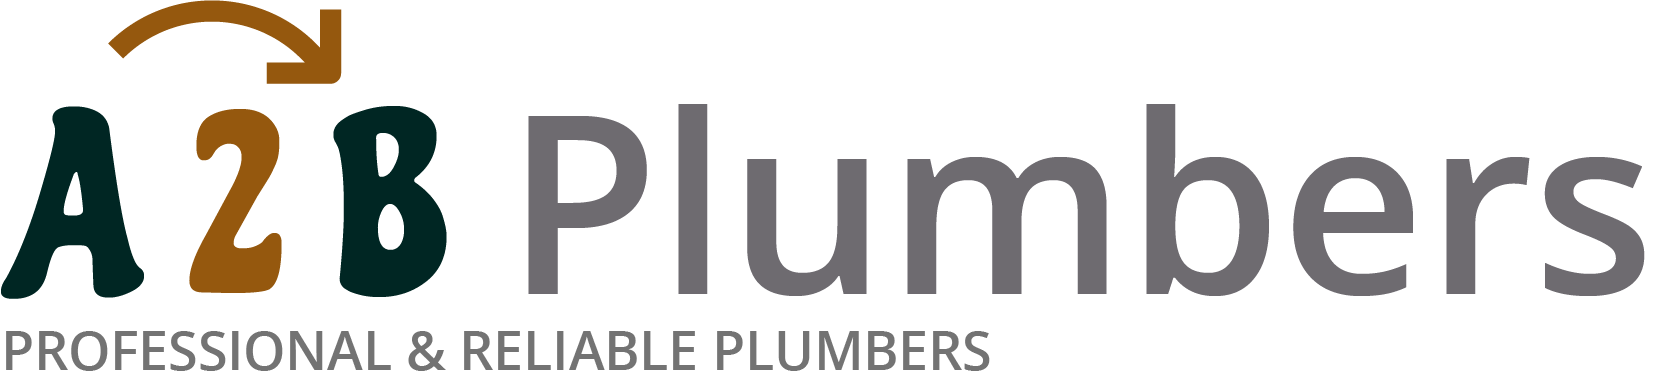 If you need a boiler installed, a radiator repaired or a leaking tap fixed, call us now - we provide services for properties in Teignmouth and the local area.